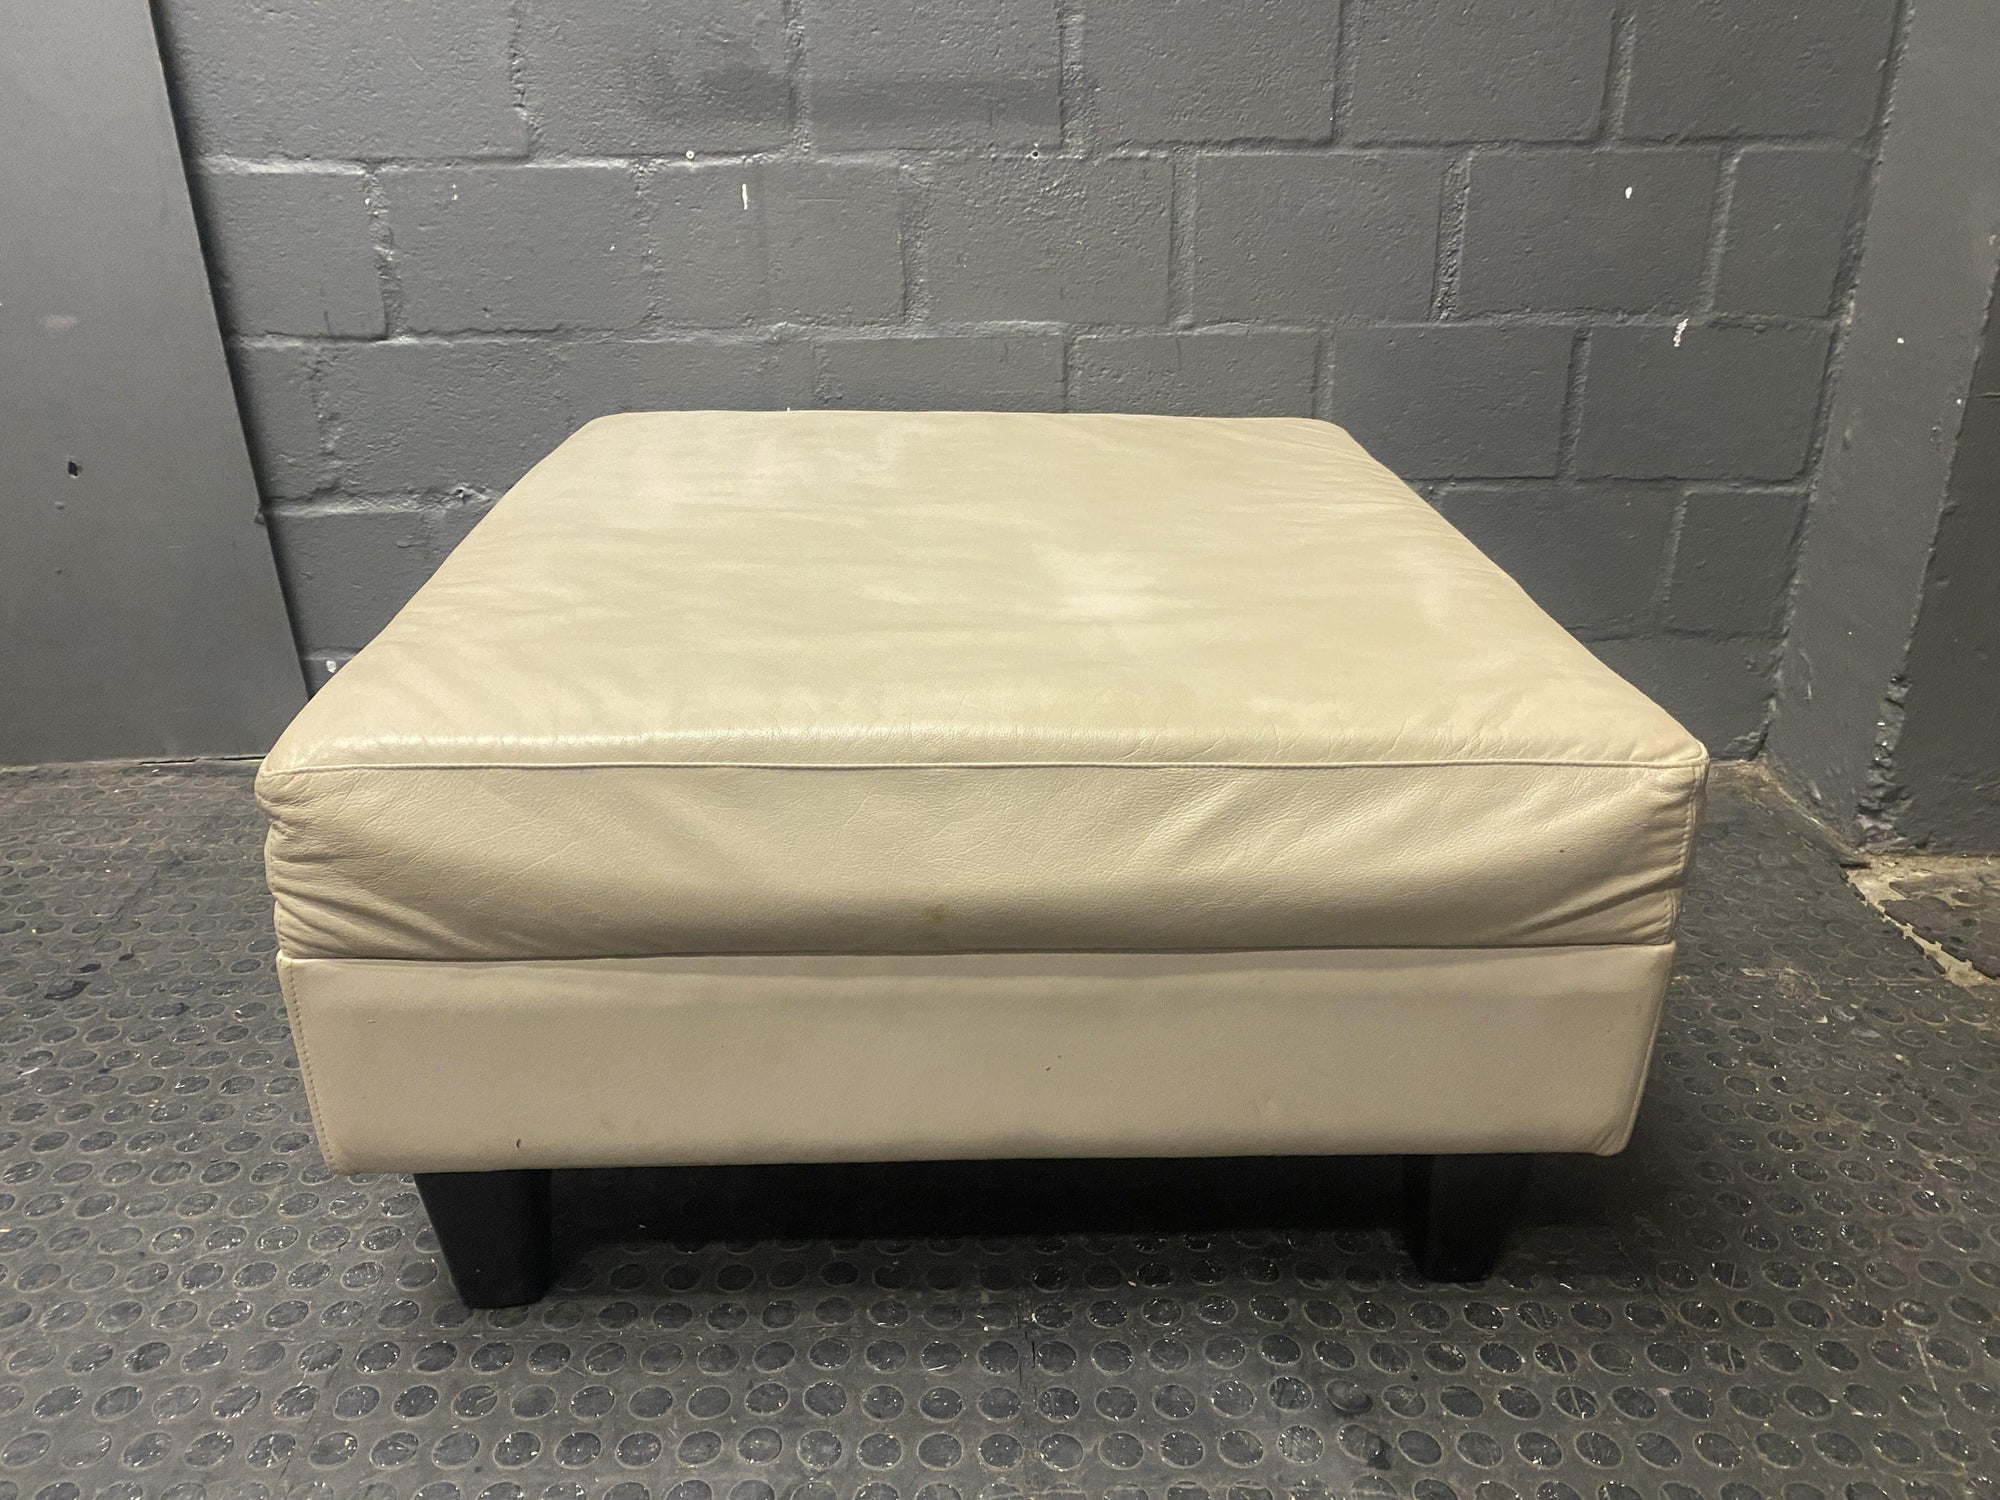 Genuine Beige Leather Ottoman -REDUCED - PRICE DROP